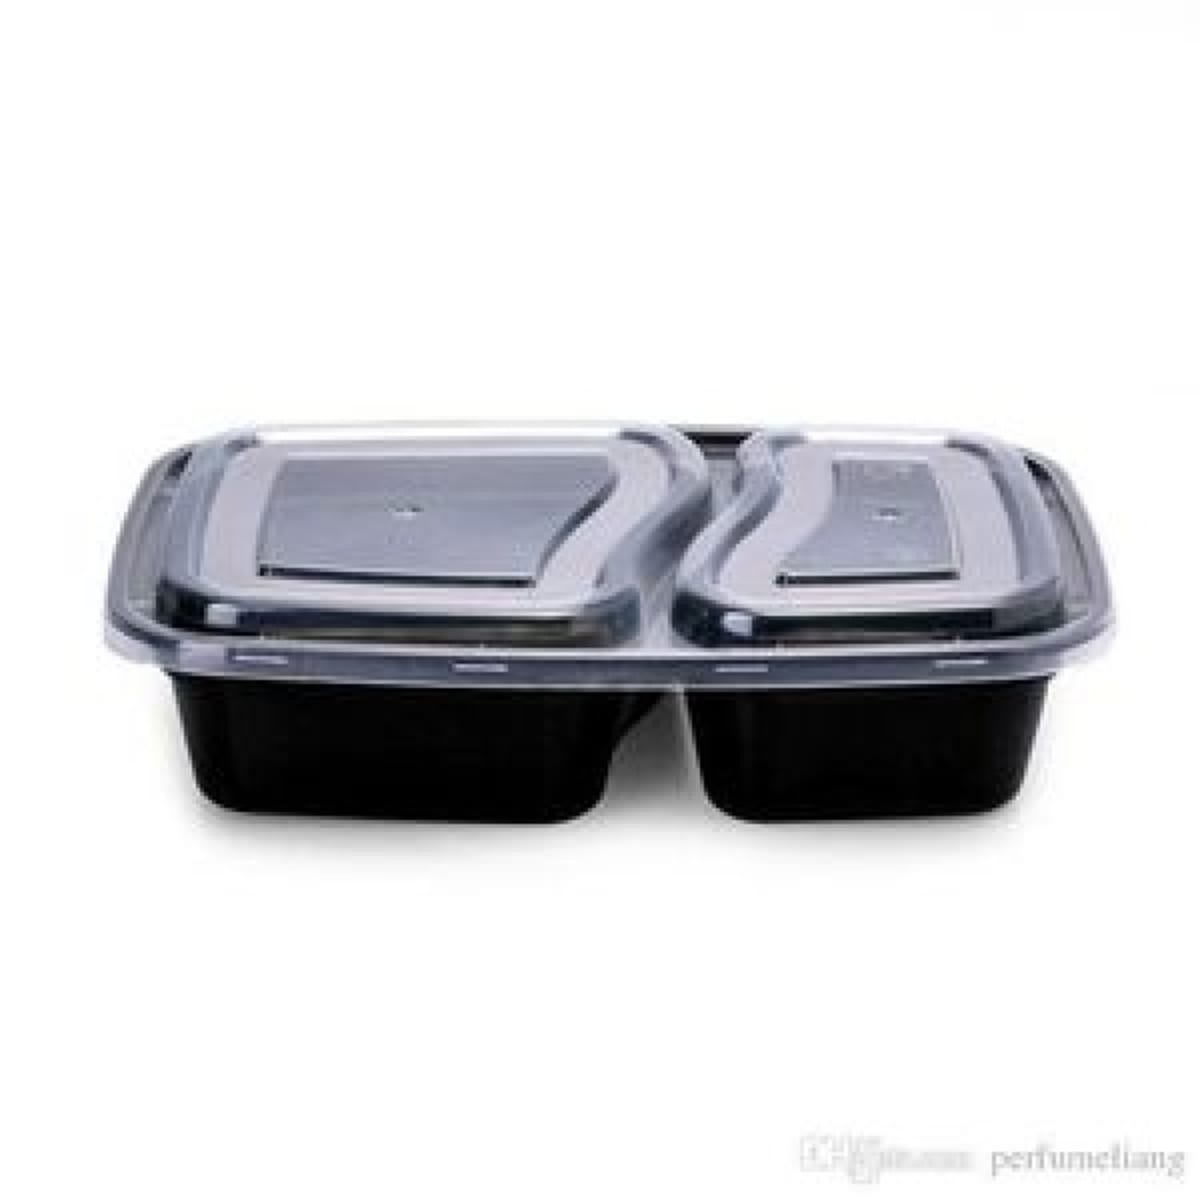 Disposable Takeaway Plates With Cover - 50pcs